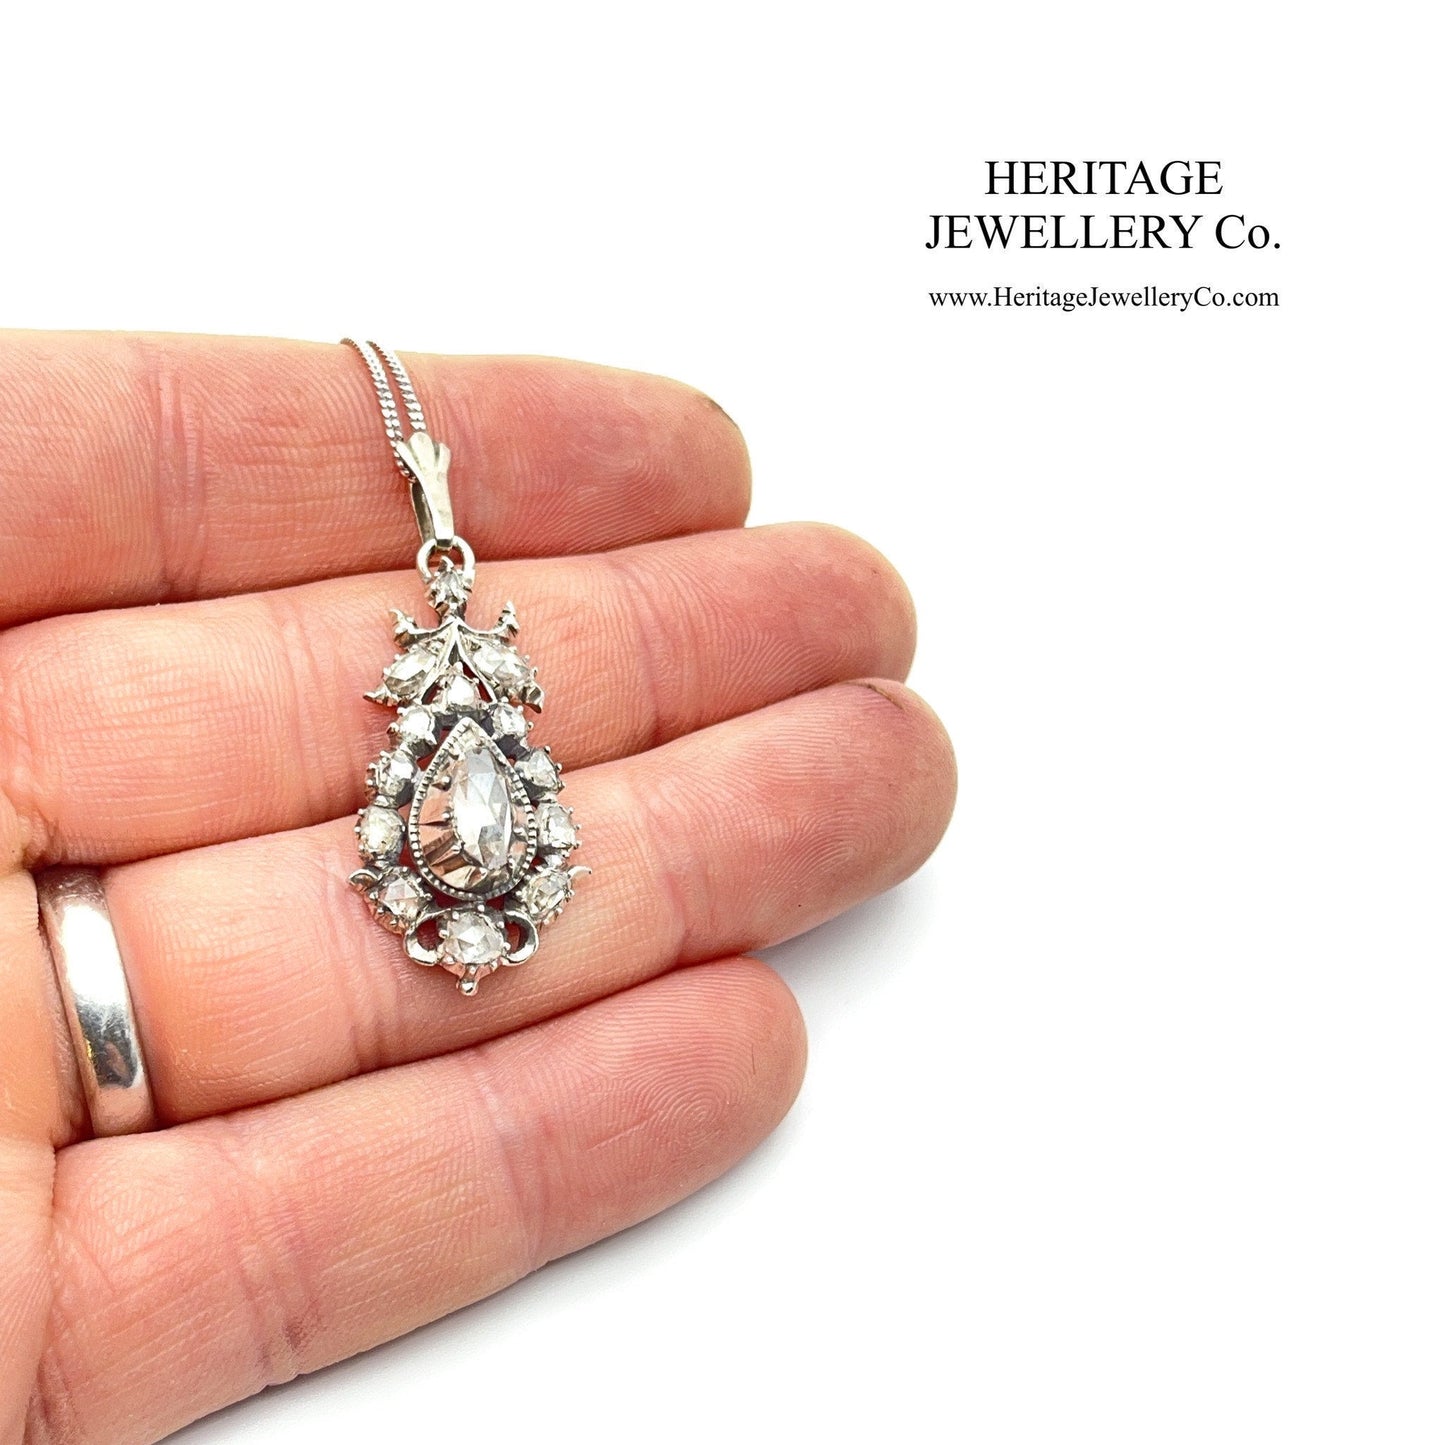 Antique Rose Diamond Pendant with White Gold Chain